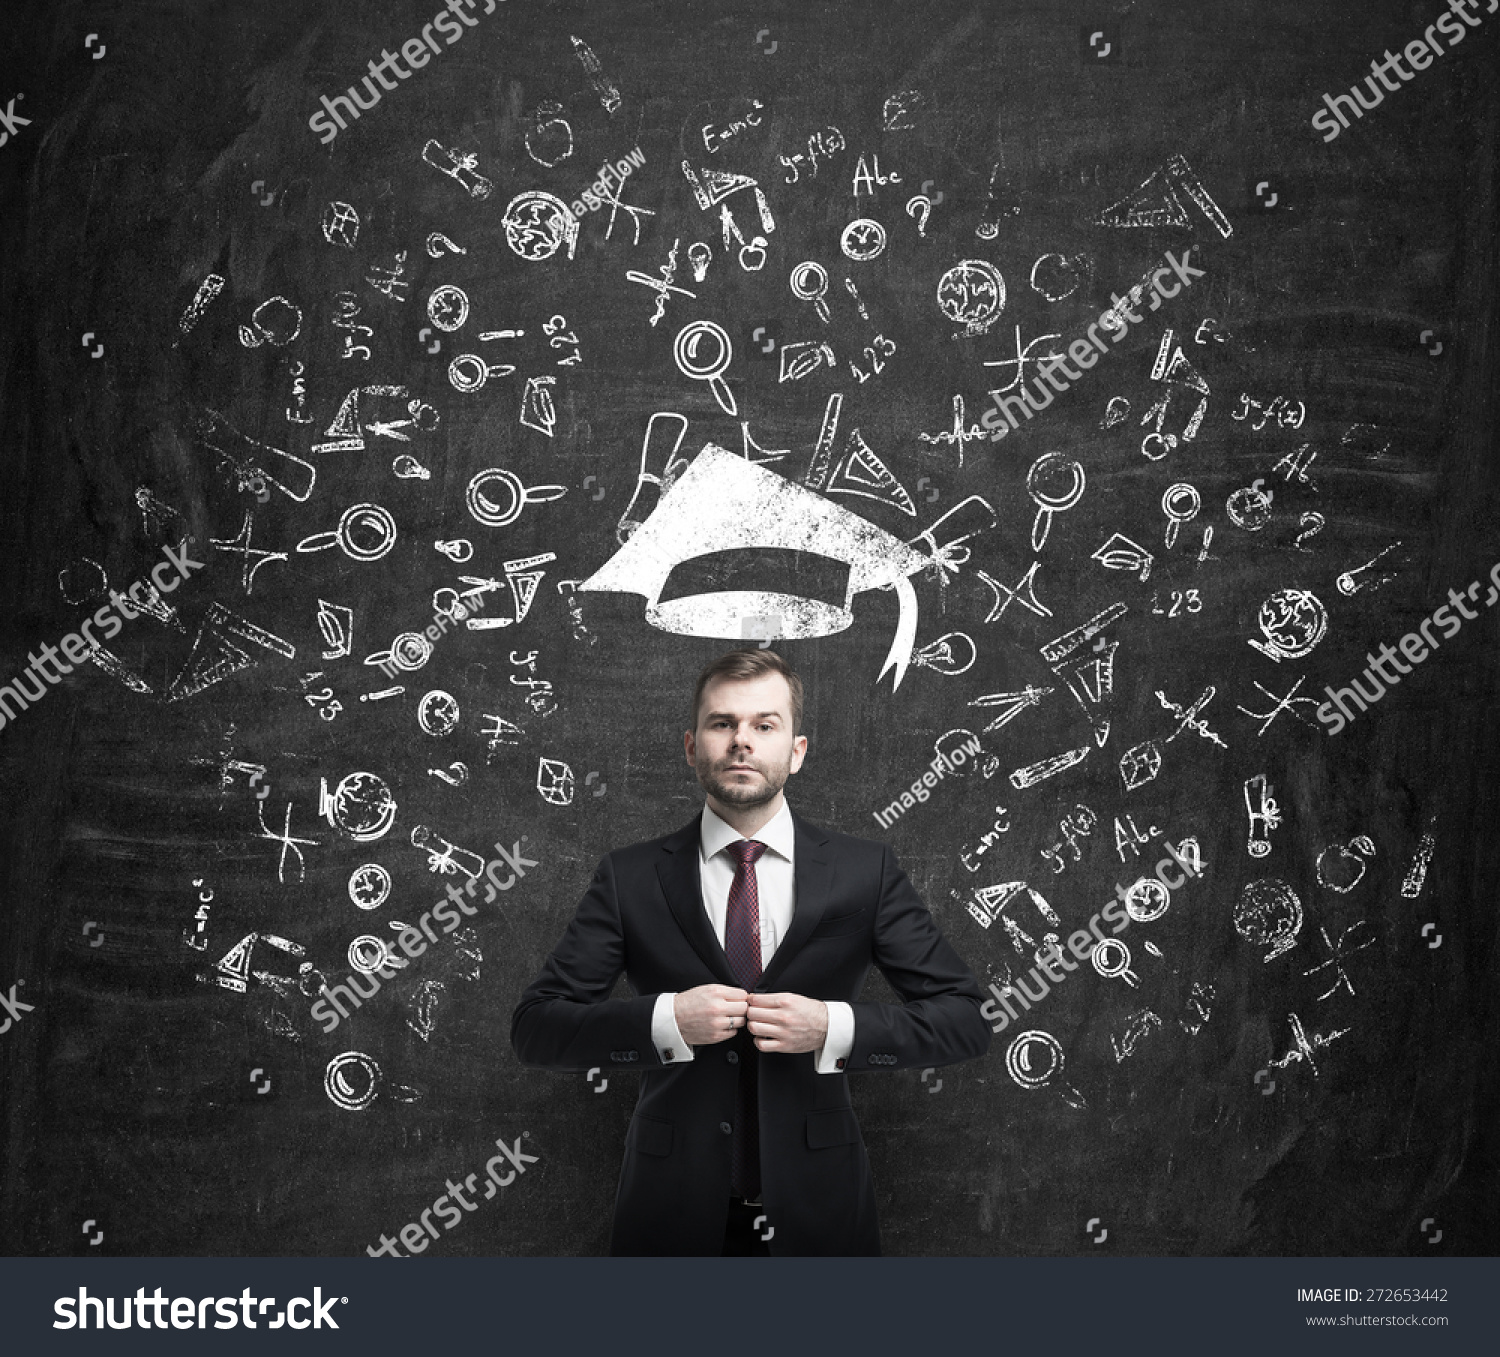 Young handsome businessman is thinking about education at business school. Drawn business icons over the dark concrete wall. Graduation hat. #272653442